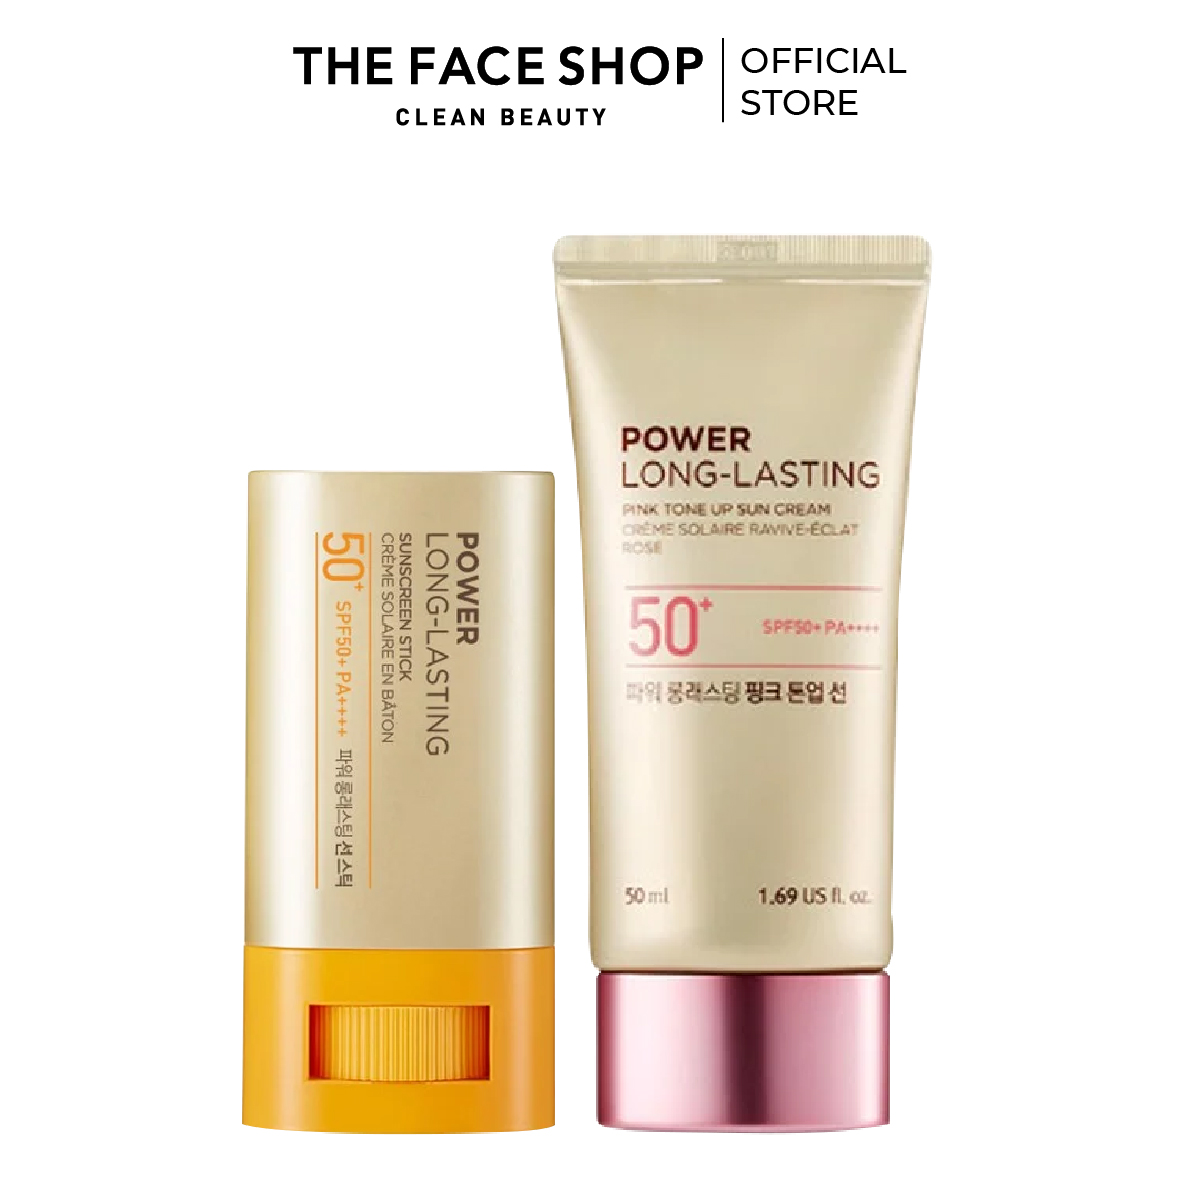 Combo Sáp Chống Nắng THE FACE SHOP 18G+Kem Chống Nắng Pink Tone Up 50Ml